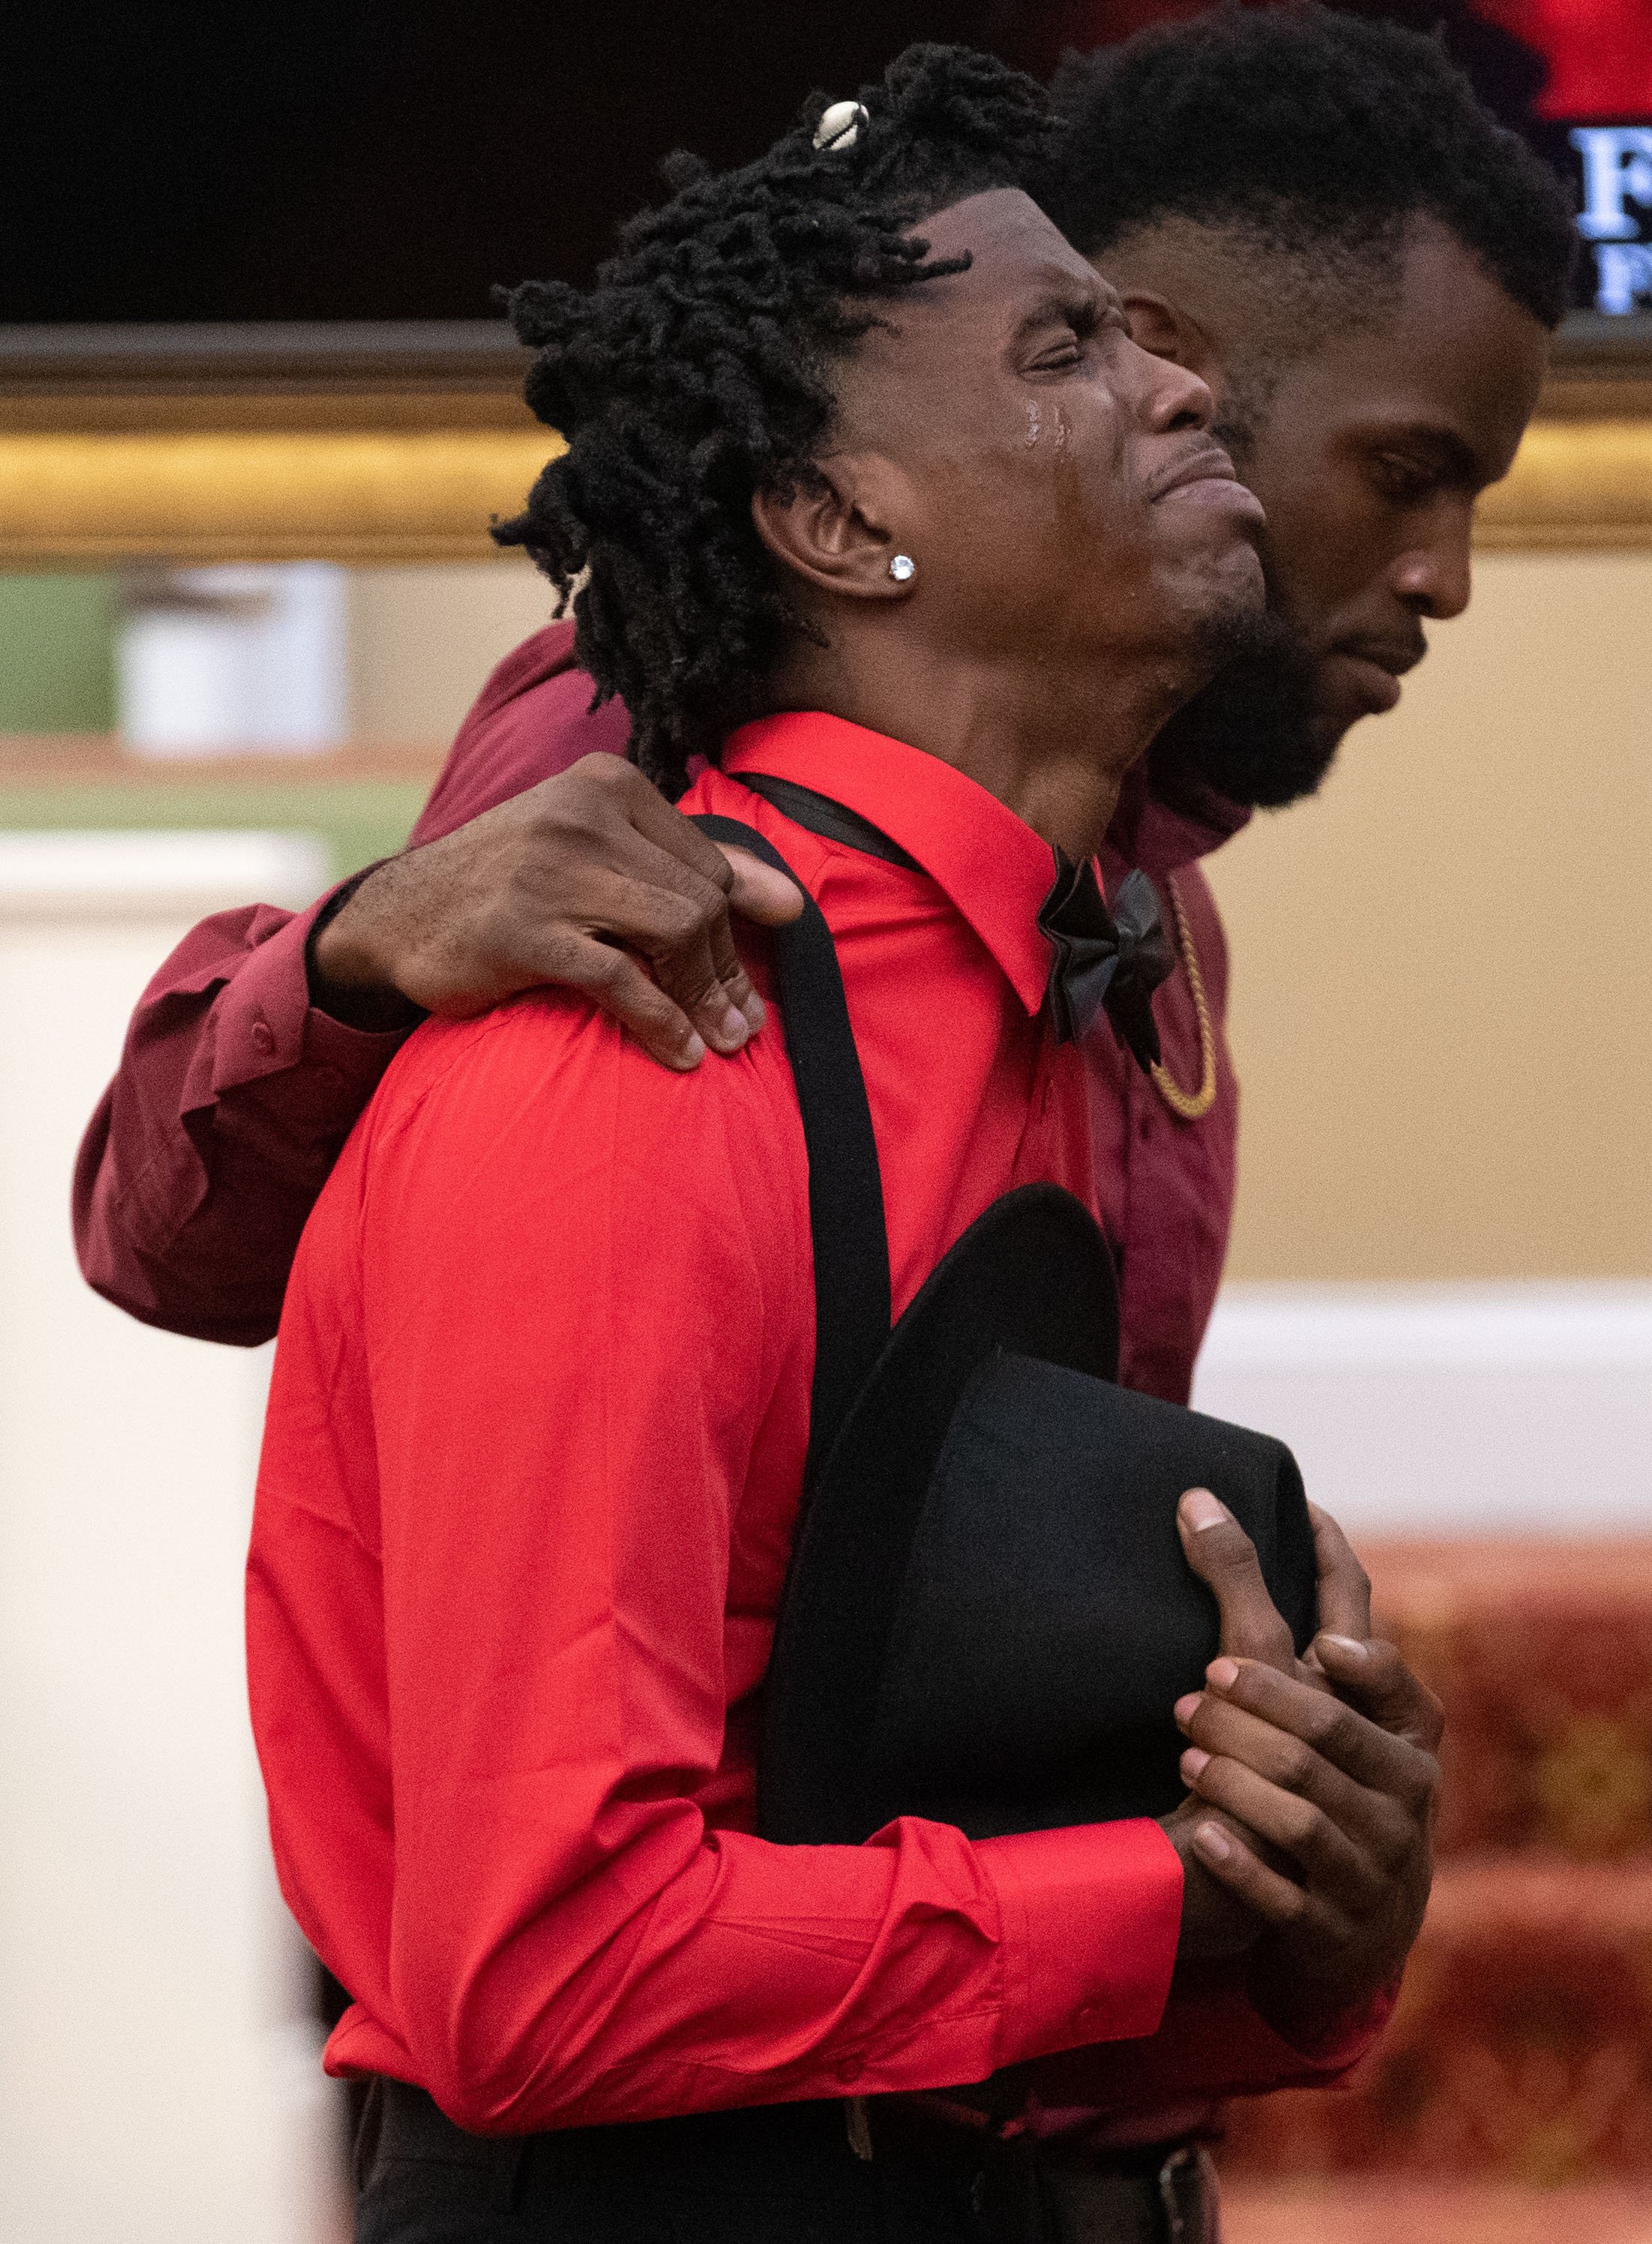  Danaye Seay, friend of Dewayne Tunstall, grieves after viewing Tustall’s casket during his funeral on Thursday, Sept. 15, 2022, in Memphis. Tunstall was killed during a shooting spree that left two others dead and three injured last Wednesday. “He w